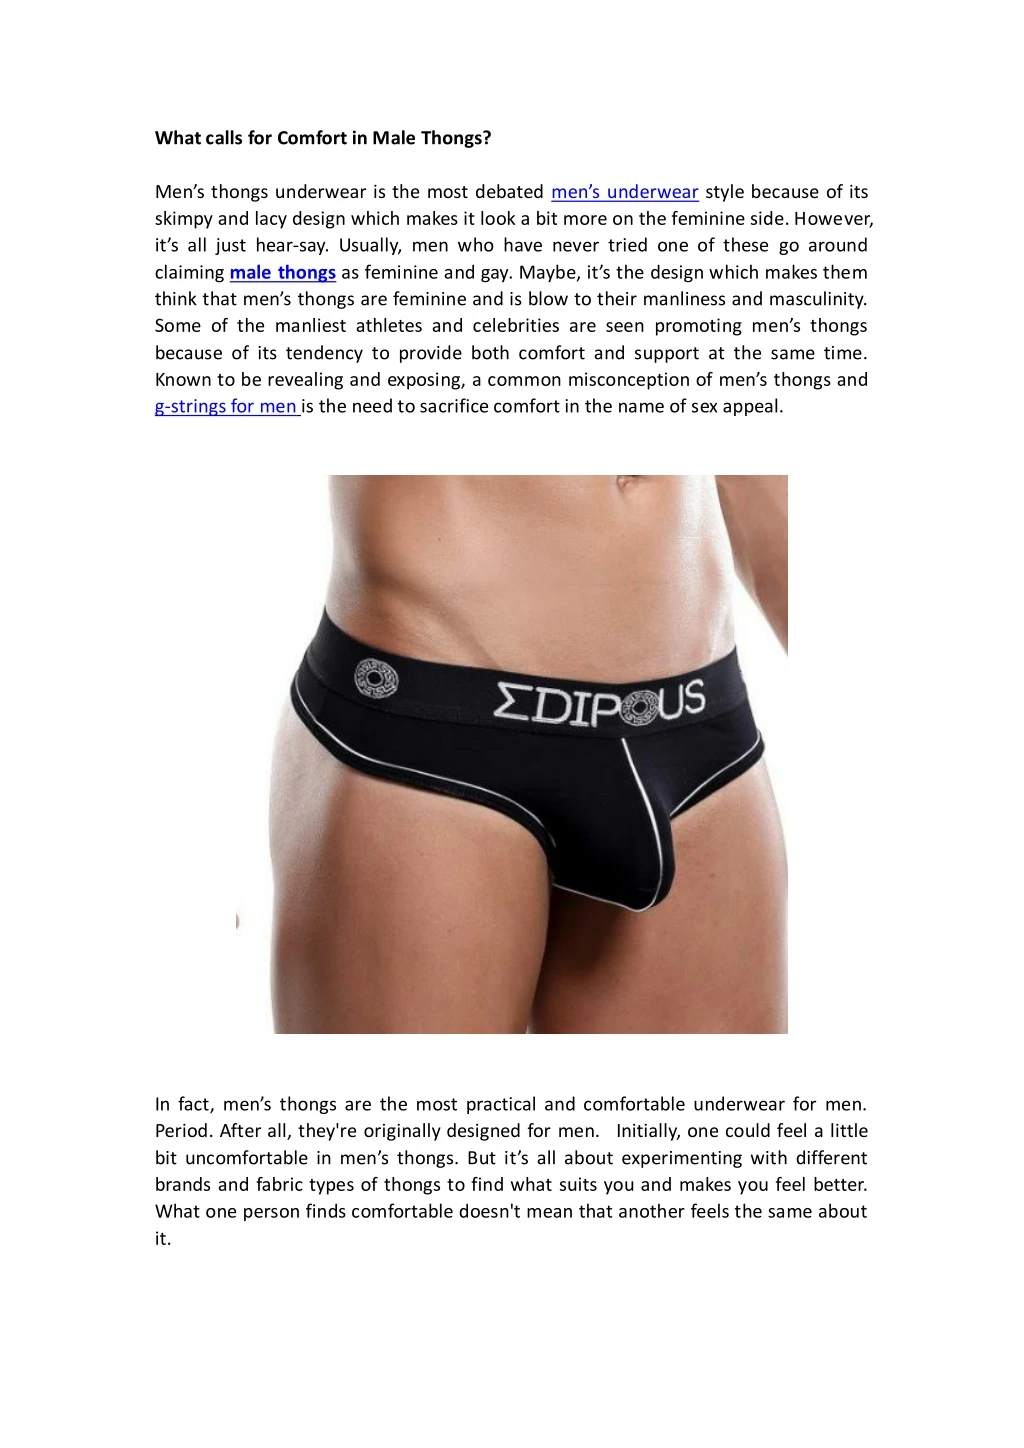 what calls for comfort in male thongs